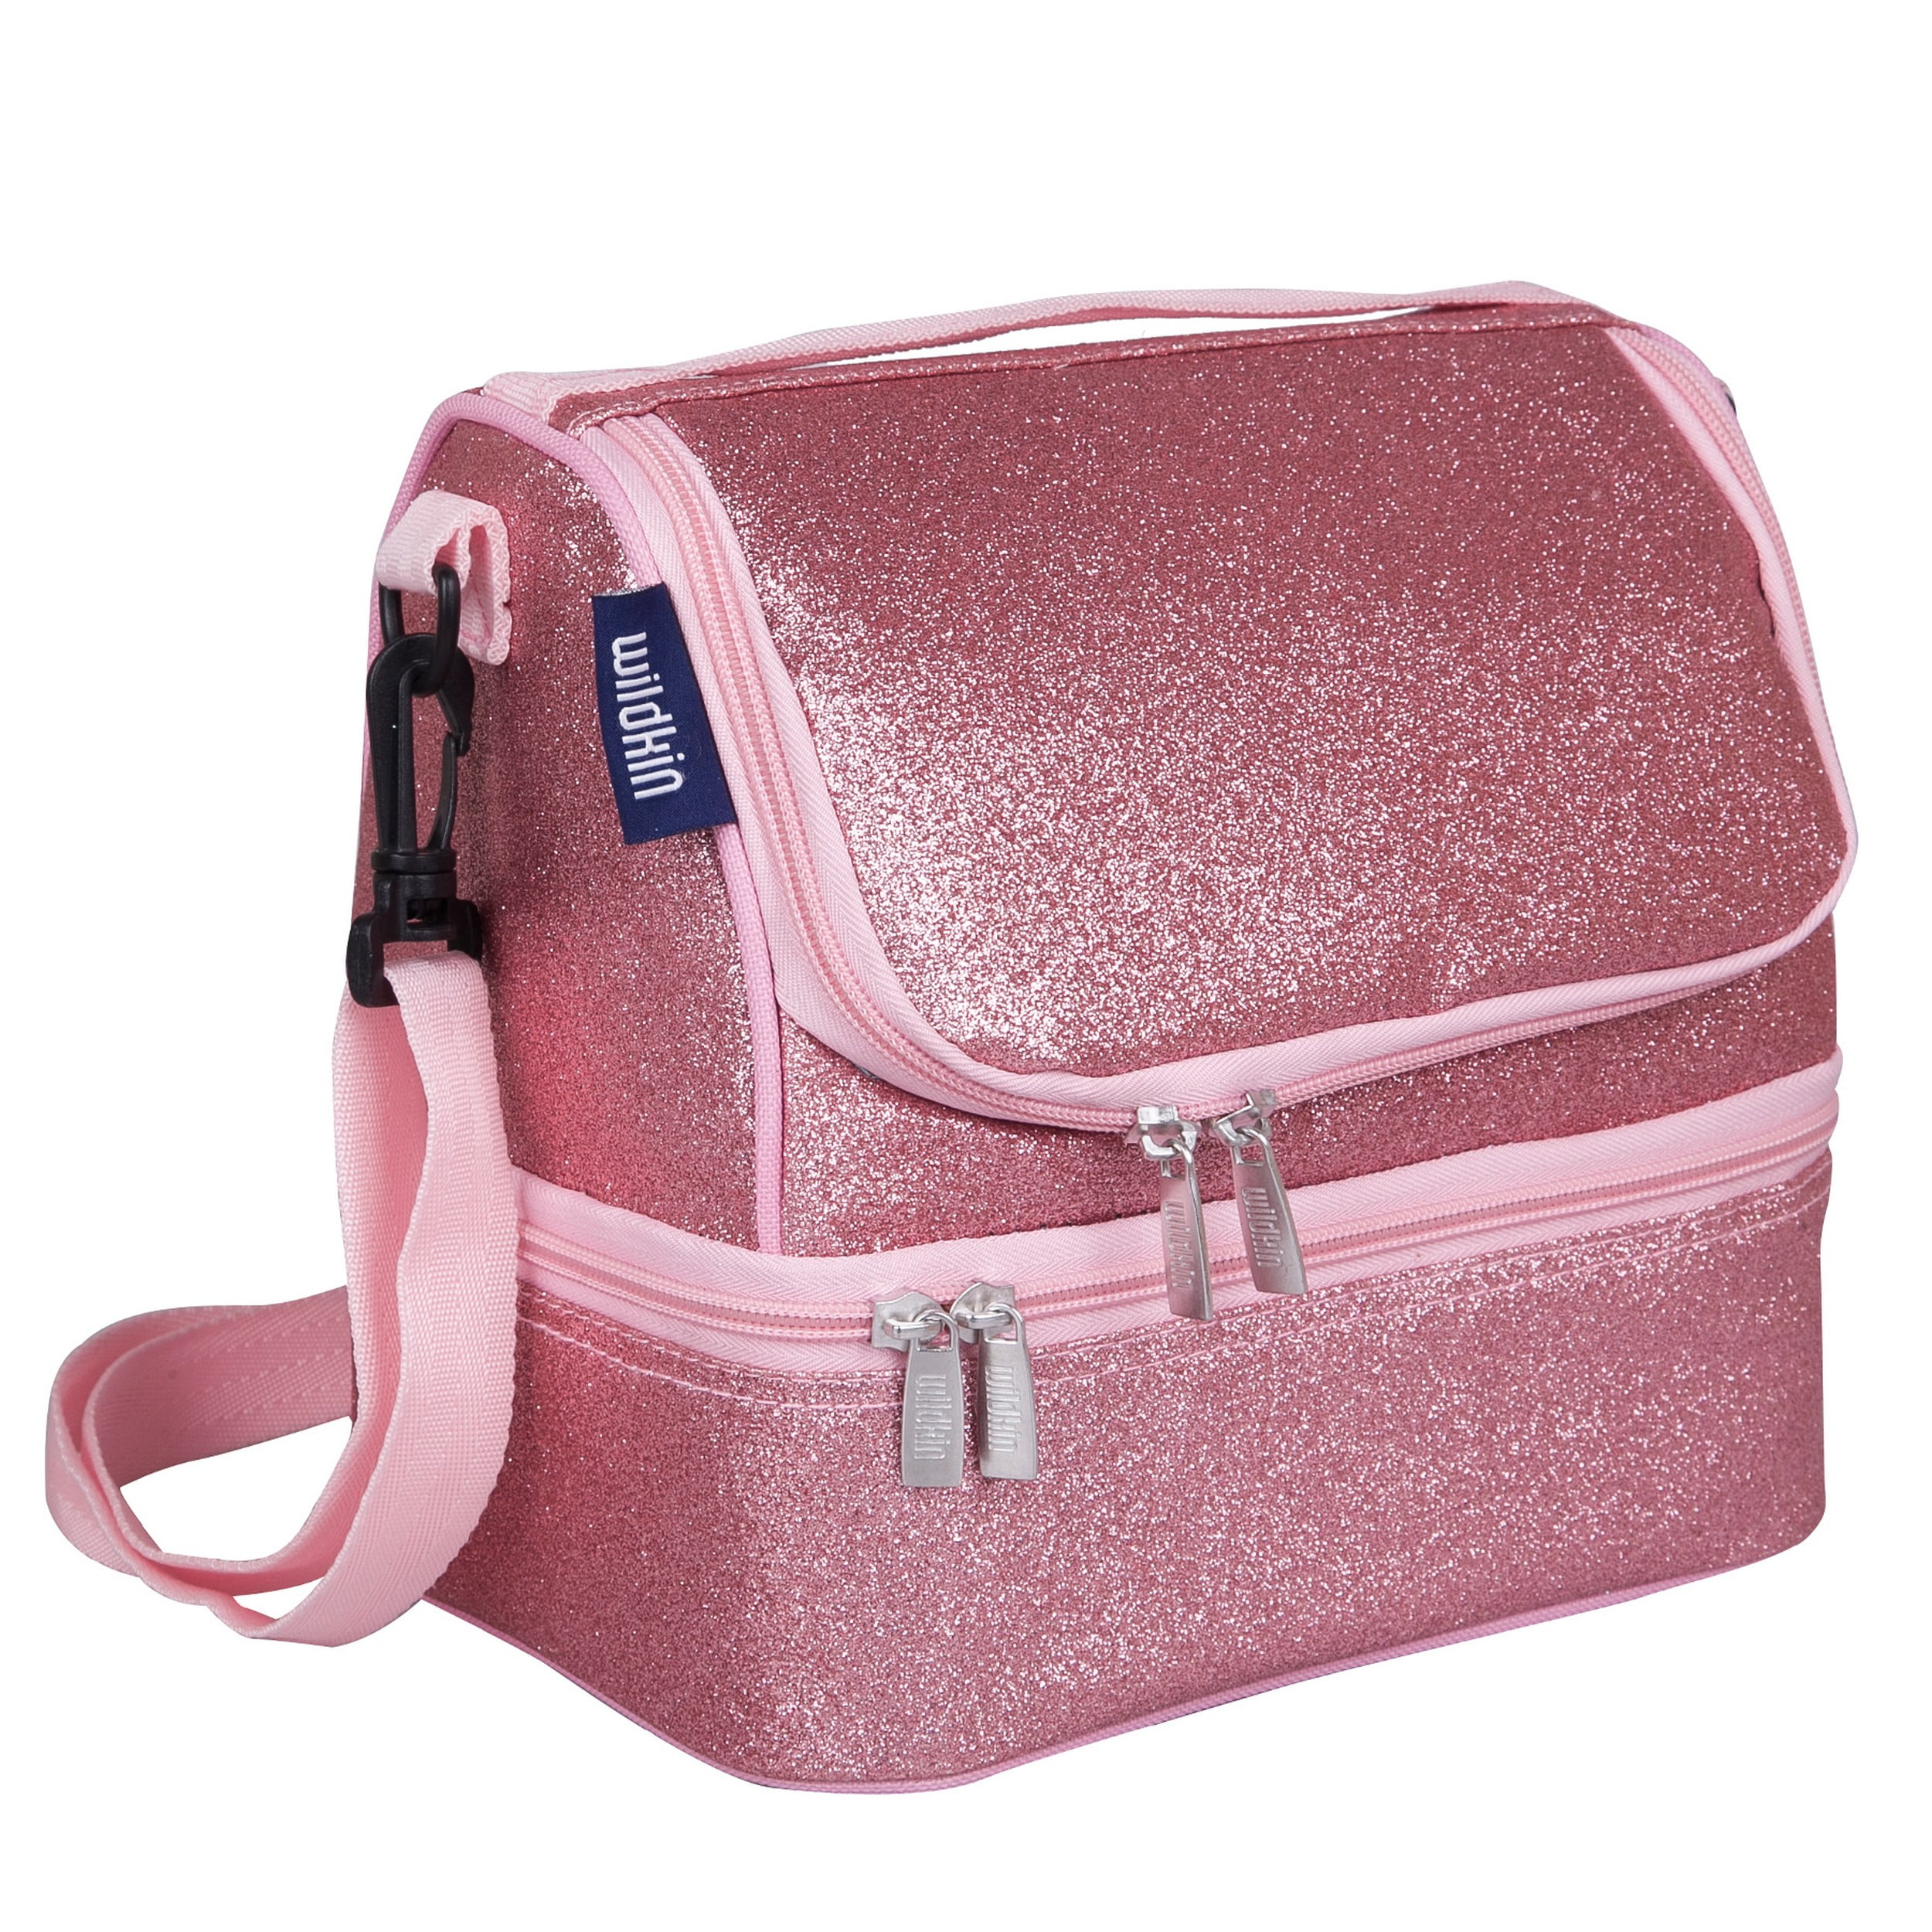 Glitter Party Insulated Lunchbox | Pink Lunchbox | Packed Party